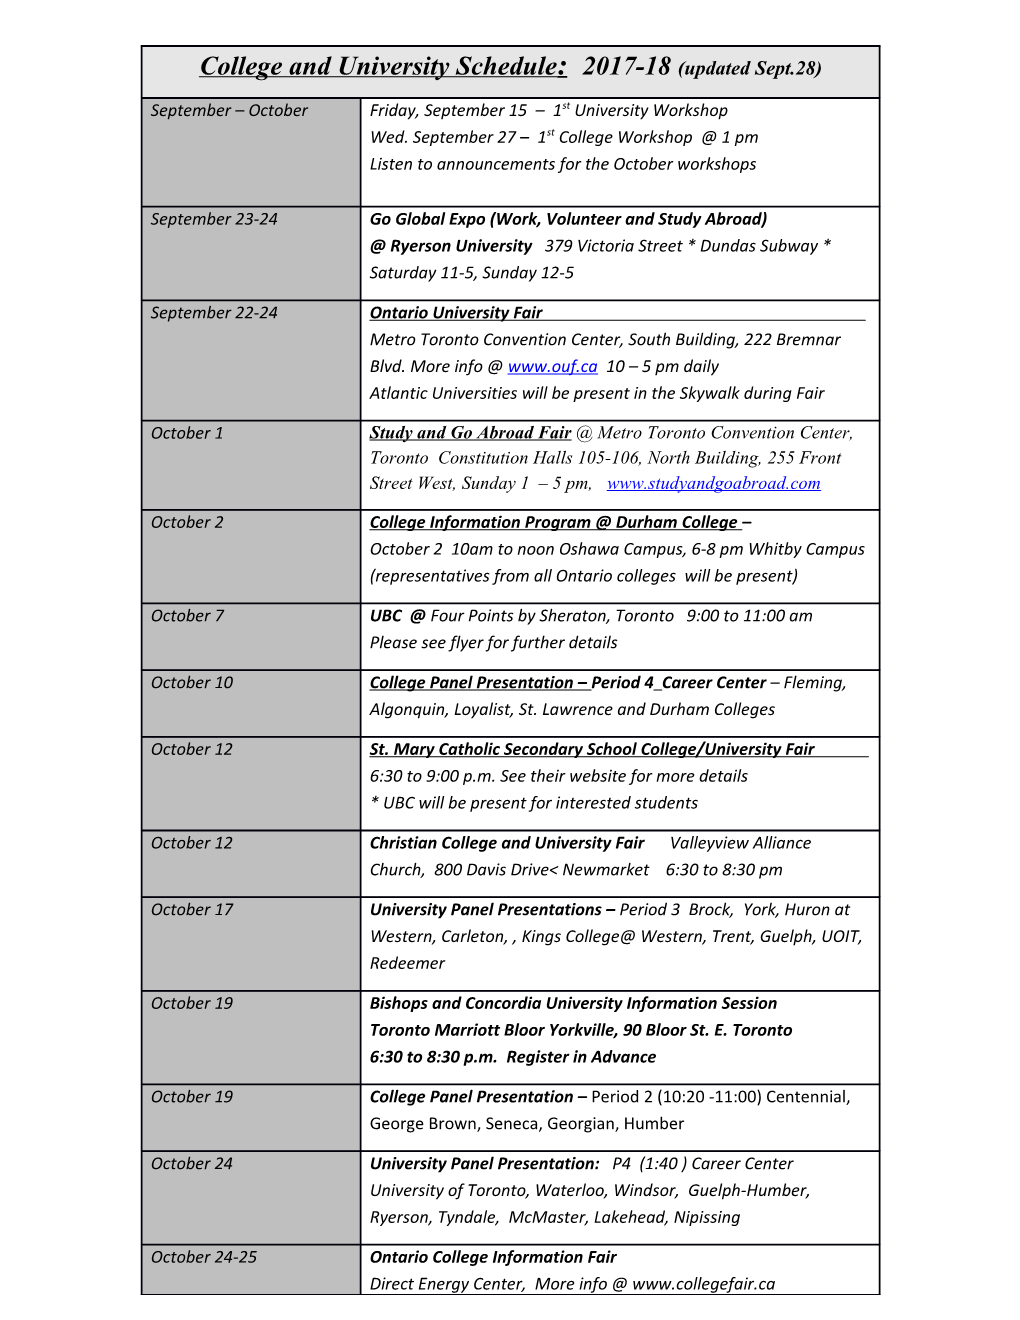 College and University Application Schedule 2003-2004